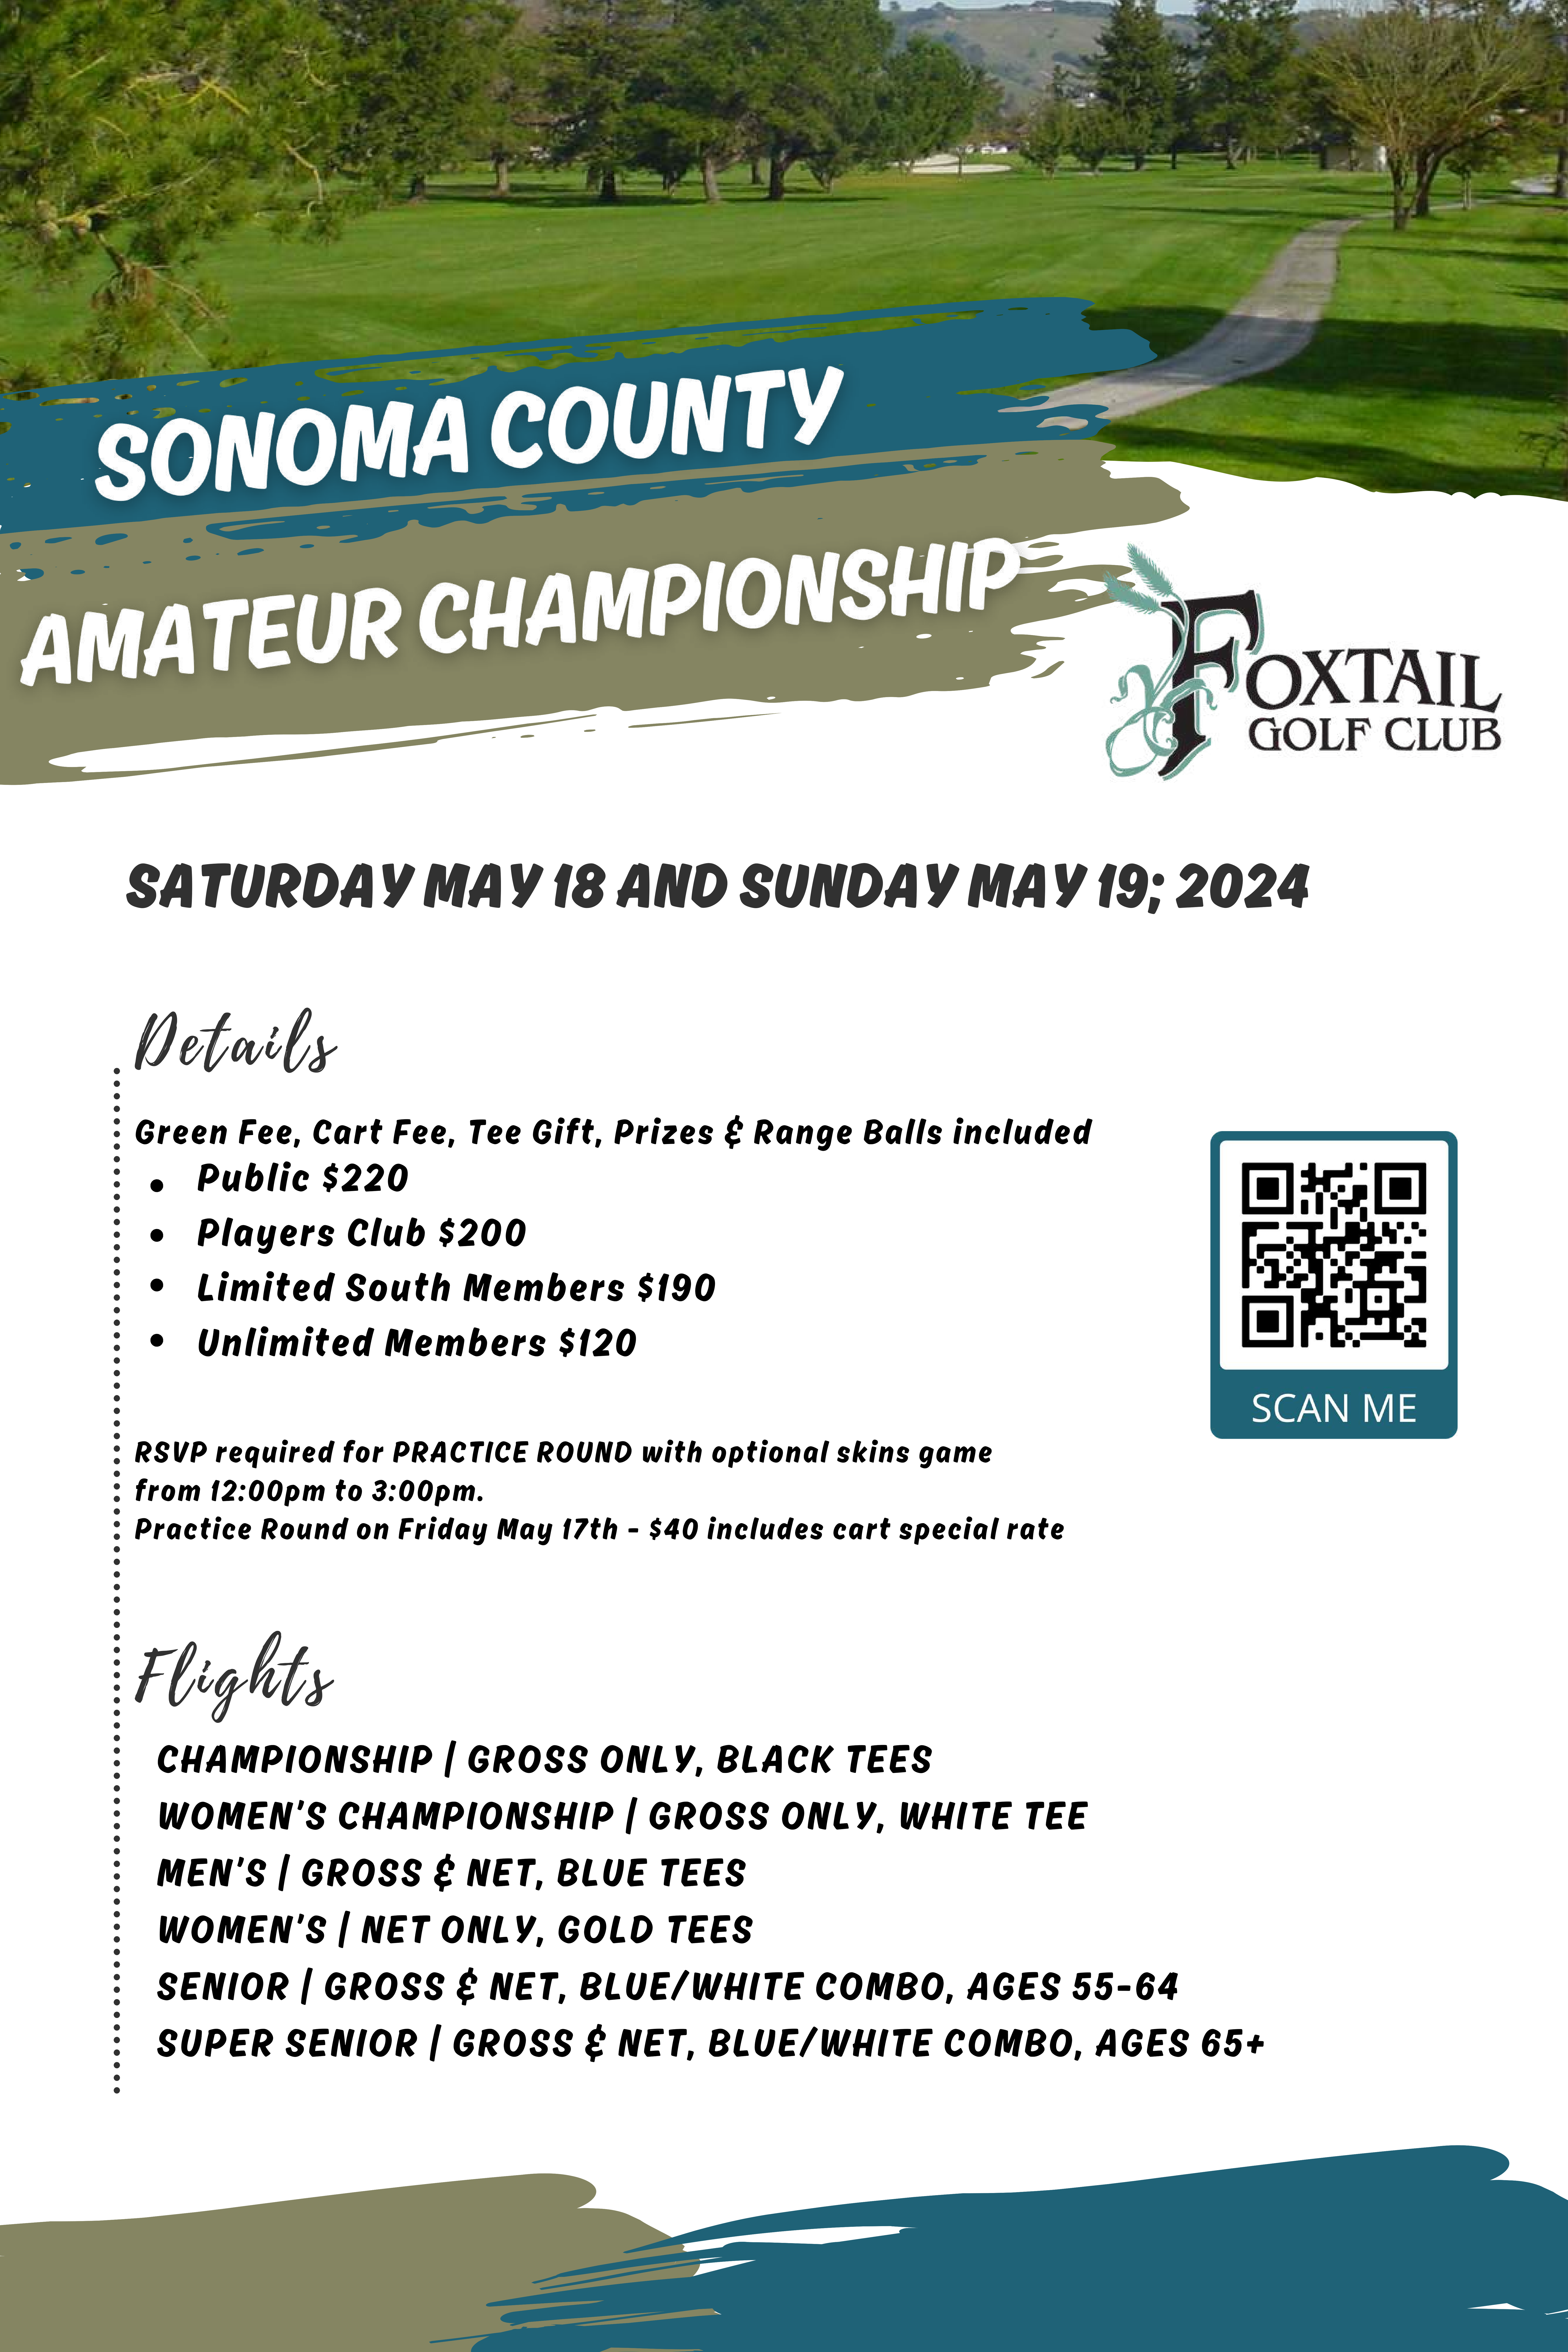 Sonoma County Amateur Flyer Foxtail.pdf 24 x 36 in compressed